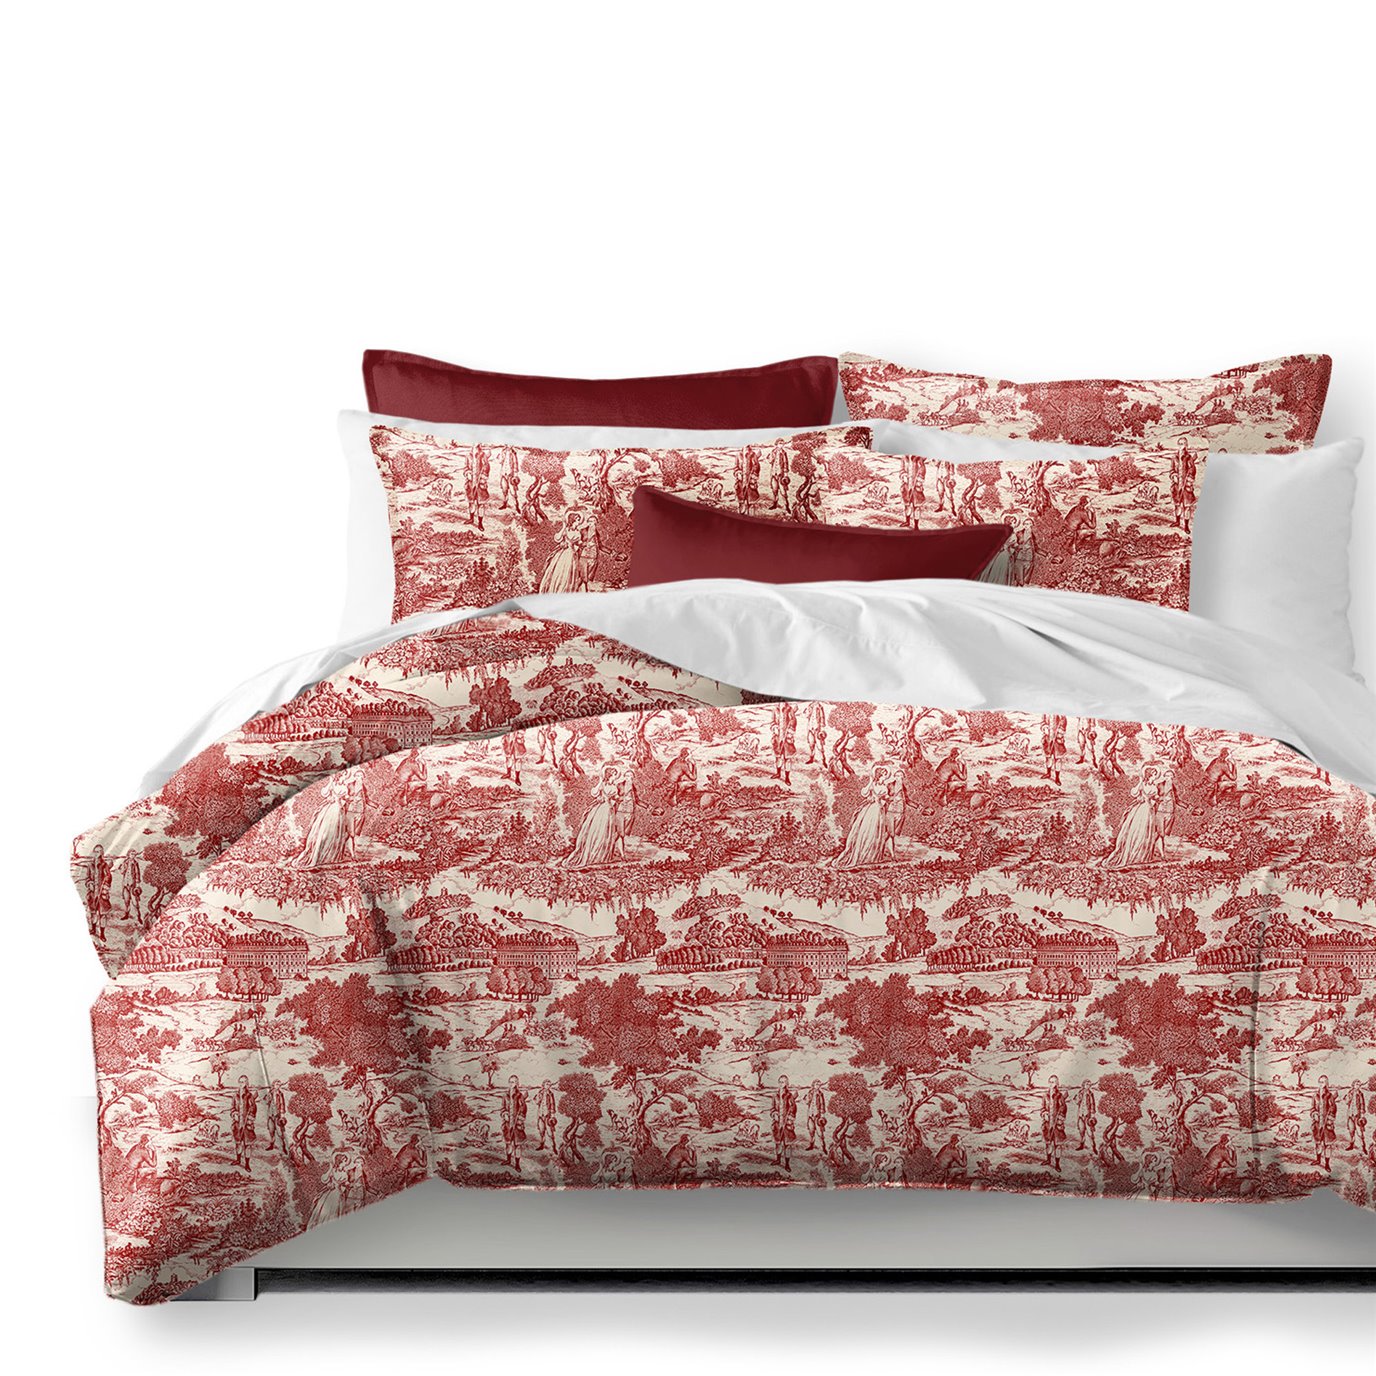 Beau Toile Red Coverlet and Pillow Sham(s) Set - Size King / California King